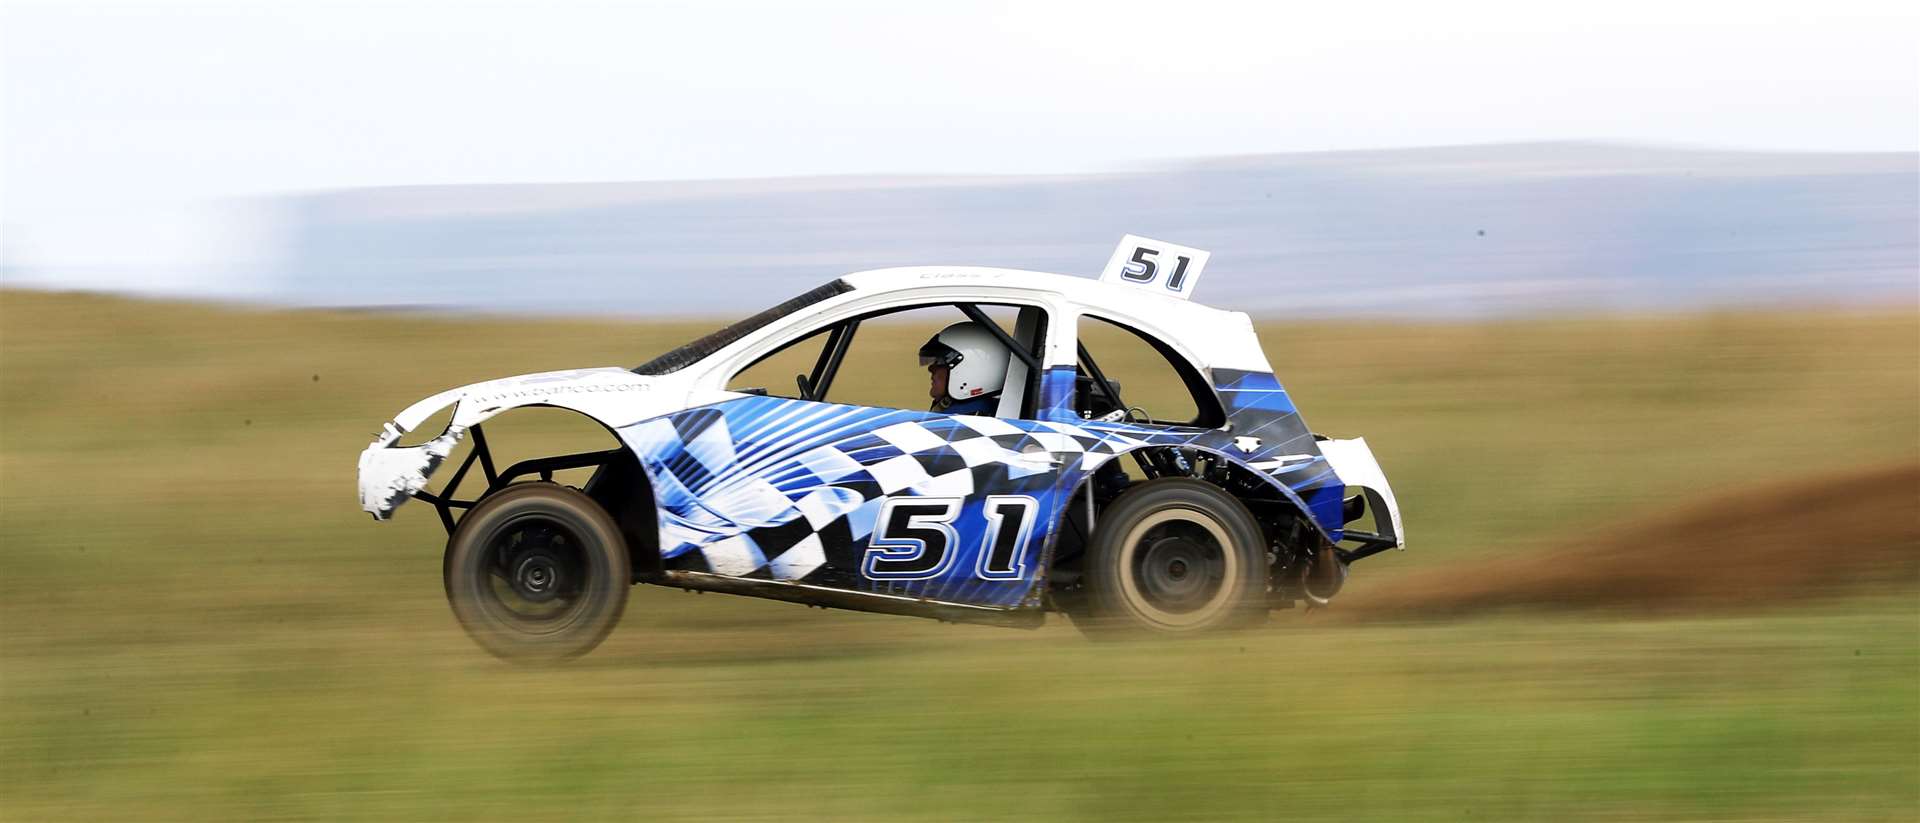 Gary Buchan (Ford Ka) was among the class winners in the Caithness Autocross Club event at Towerhill on Sunday. Picture: James Gunn